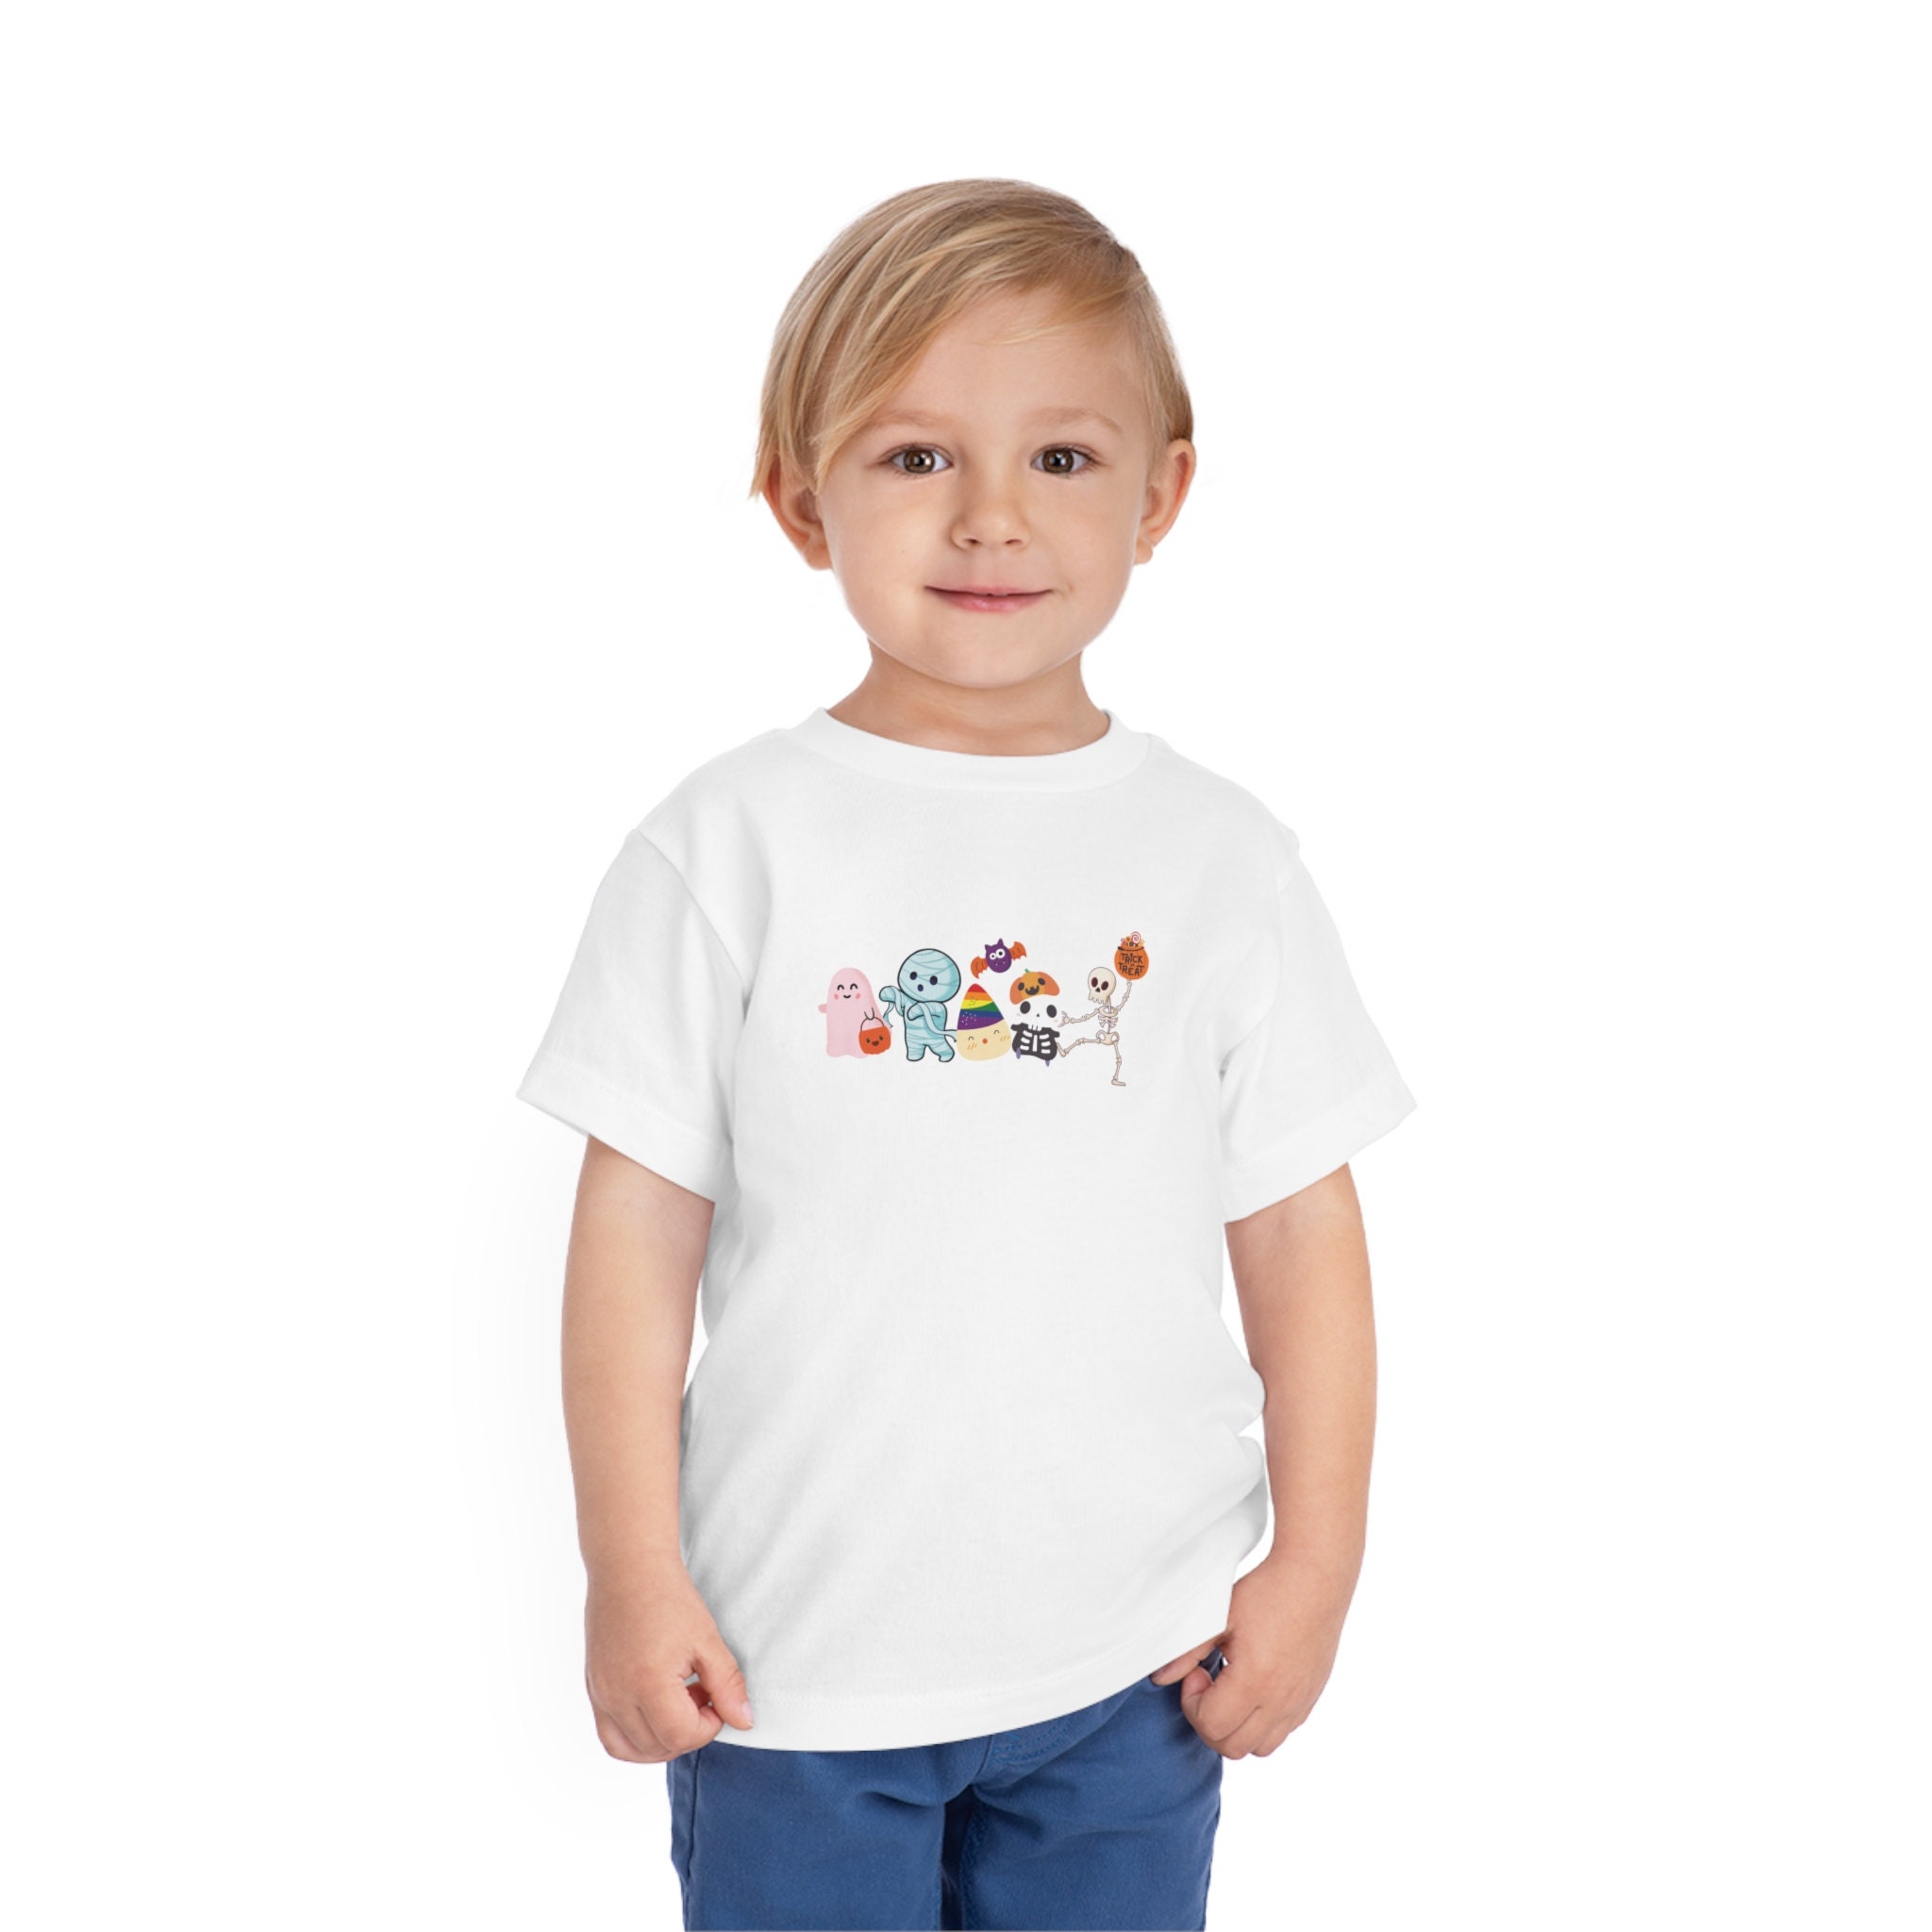 Discover Toddler T-Shirt Short Sleeve T Shirt - Sizes 2T - 5T Gift for Her Gift for Him Gift for Niece Gift for Nephew Trick or Treat Fun Halloween